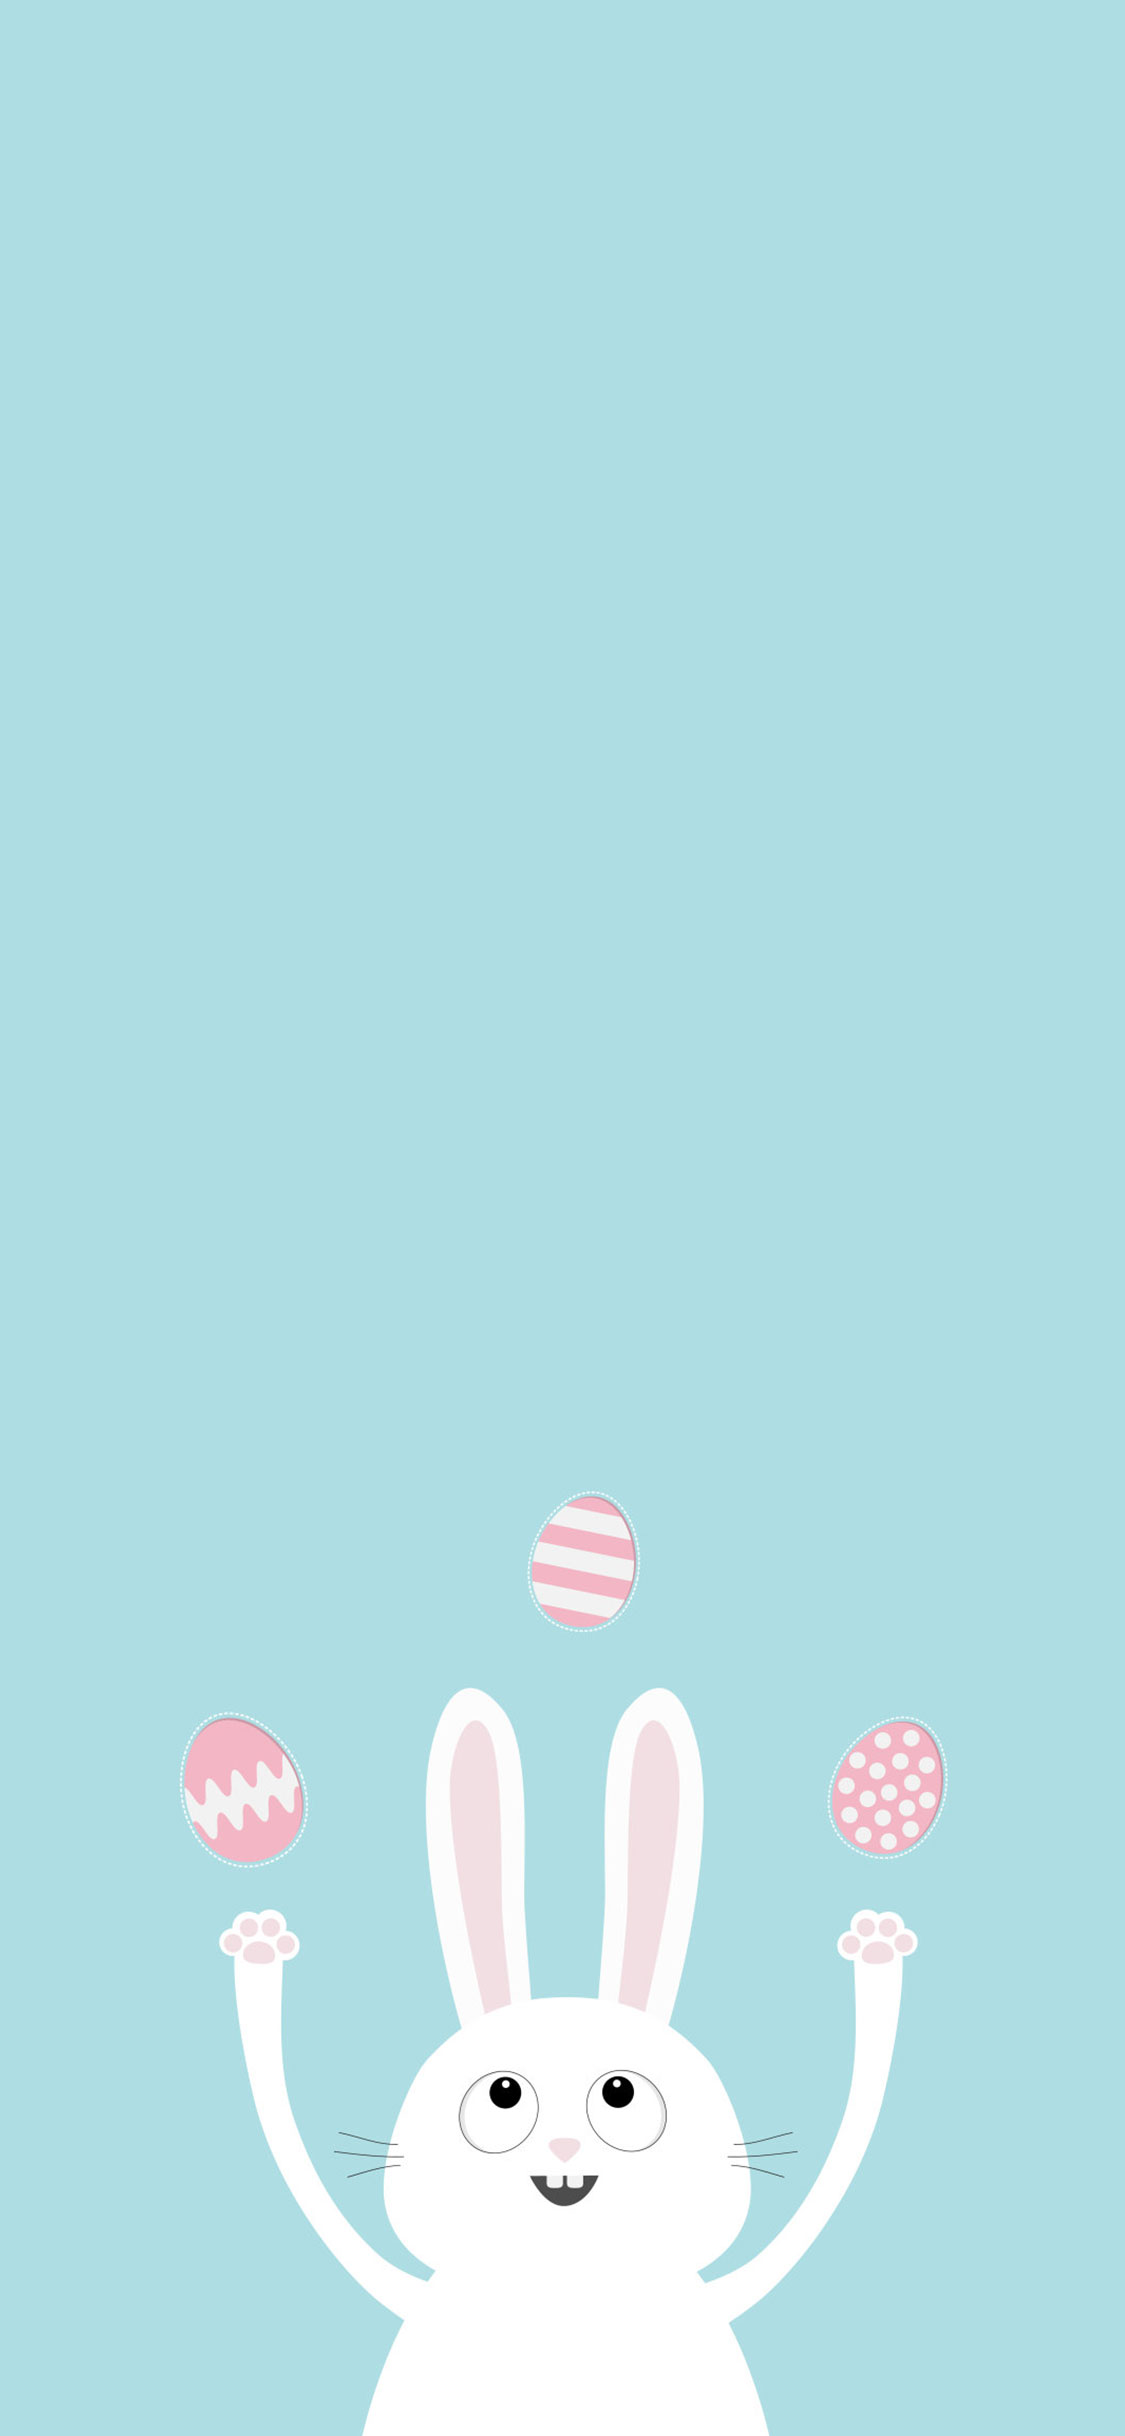 31 HD Girly iPhone Wallpapers for iPhone 6/6S/7/8/X/XS/XR